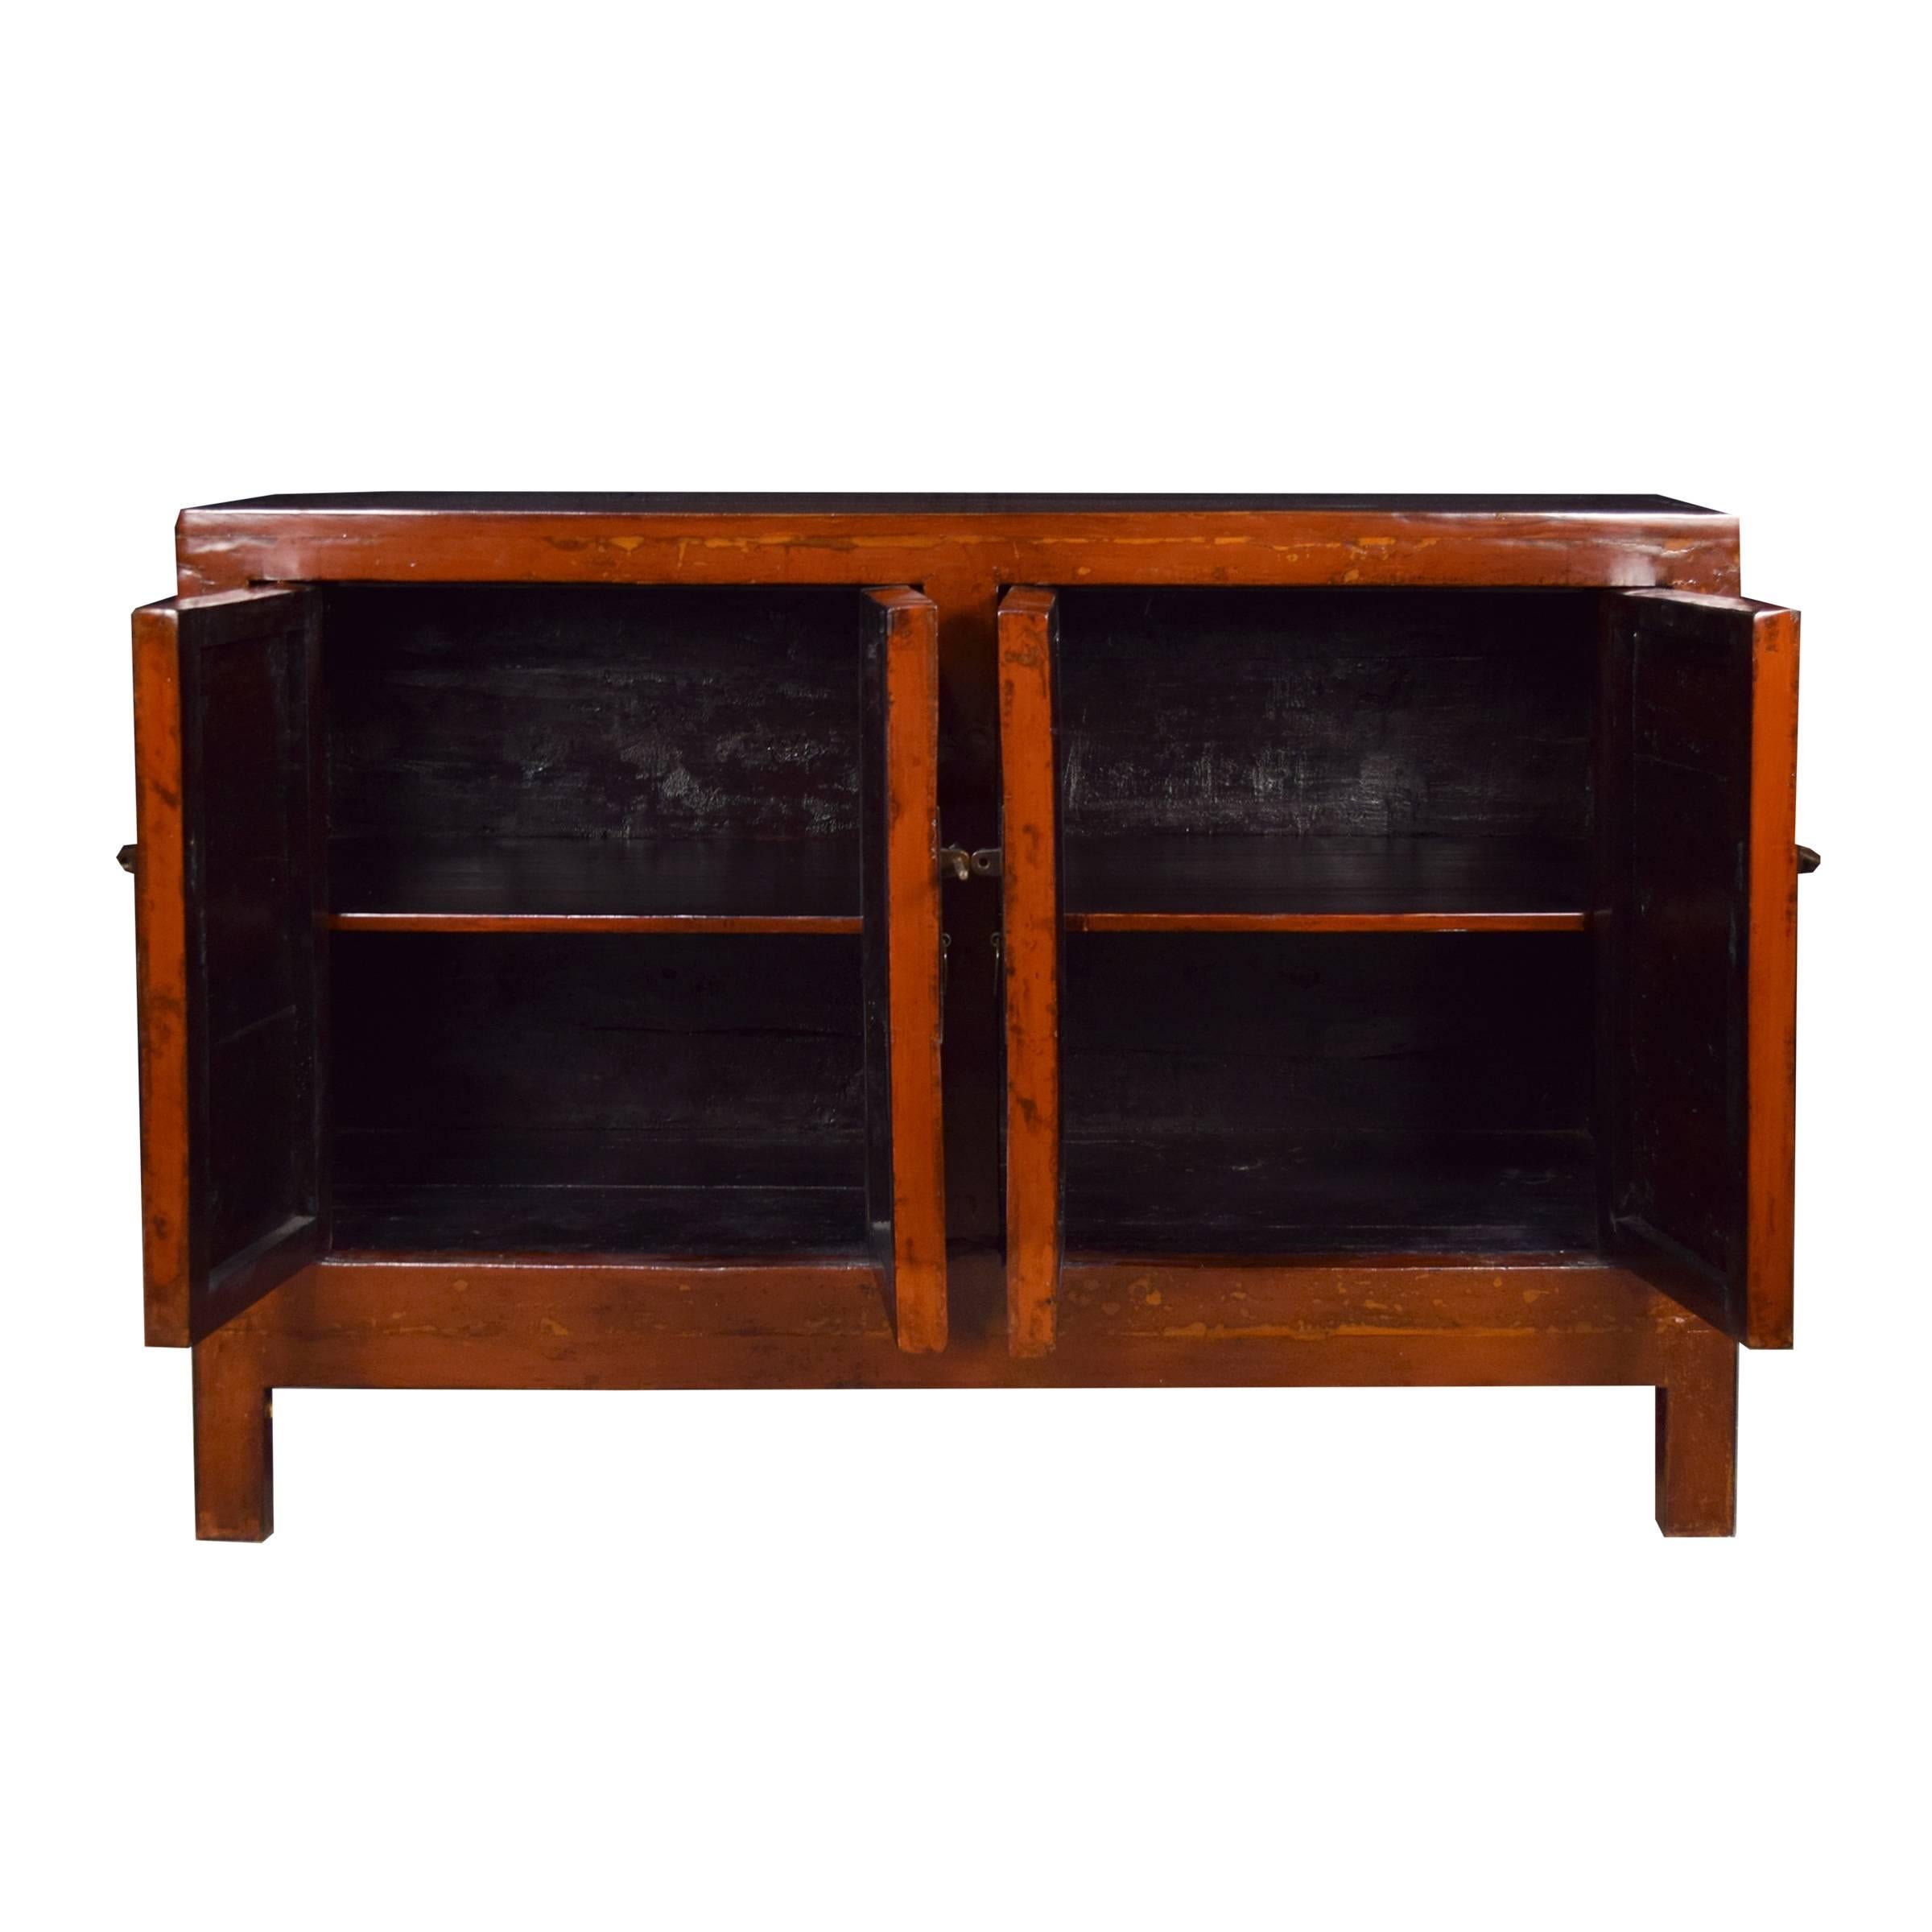 This 19th century chest, hailing out of Northern China, started its life as a storage trunk with a solid lacquered front. Our artisans, skilled in traditional Chinese carpentry and lacquer finishes, reconfigured it into a four-door chest; brushing